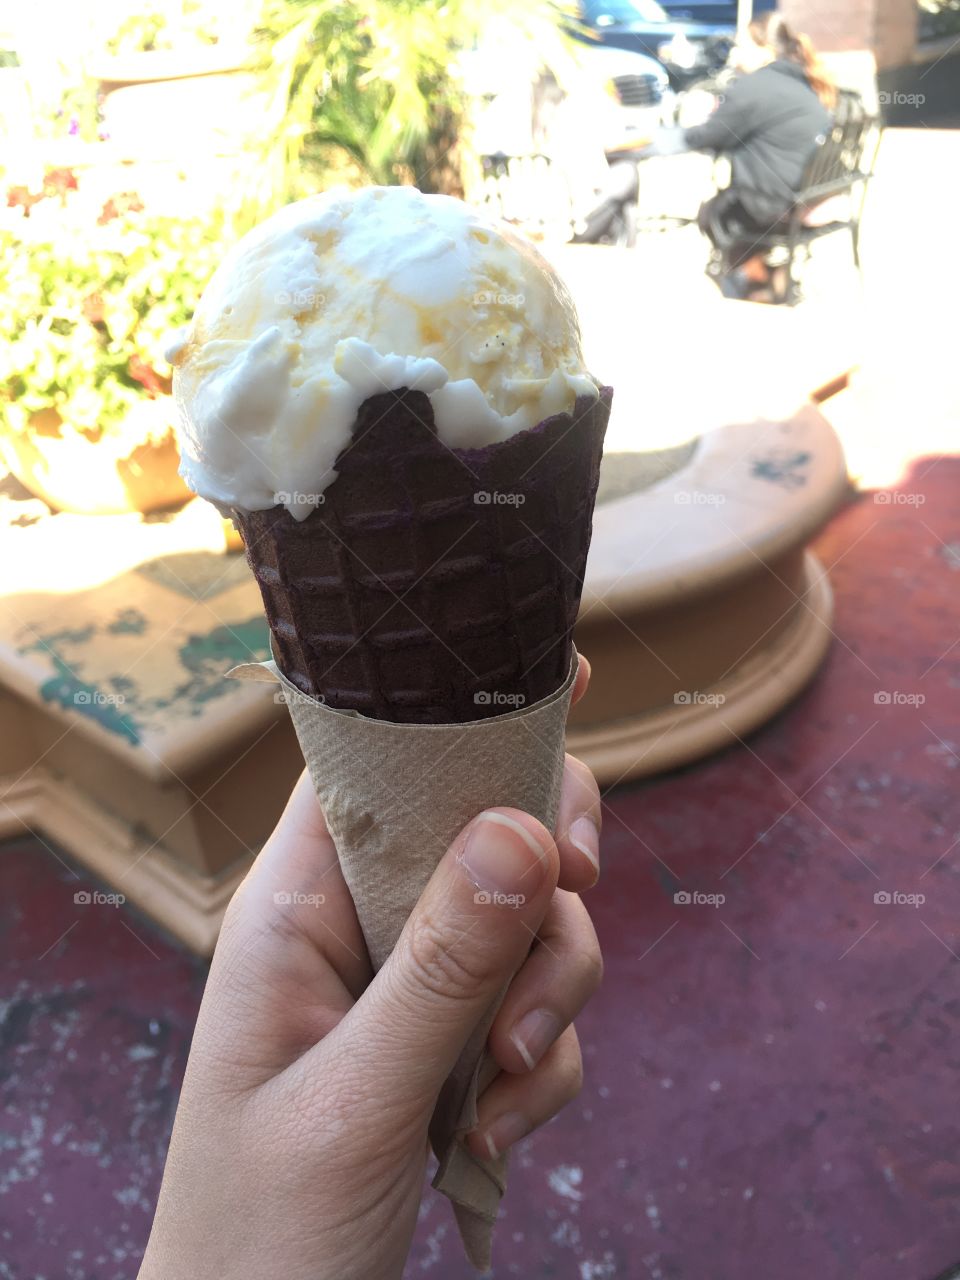 Sticky mango ice cream with sweet purple yam cone! So unique and tasty!